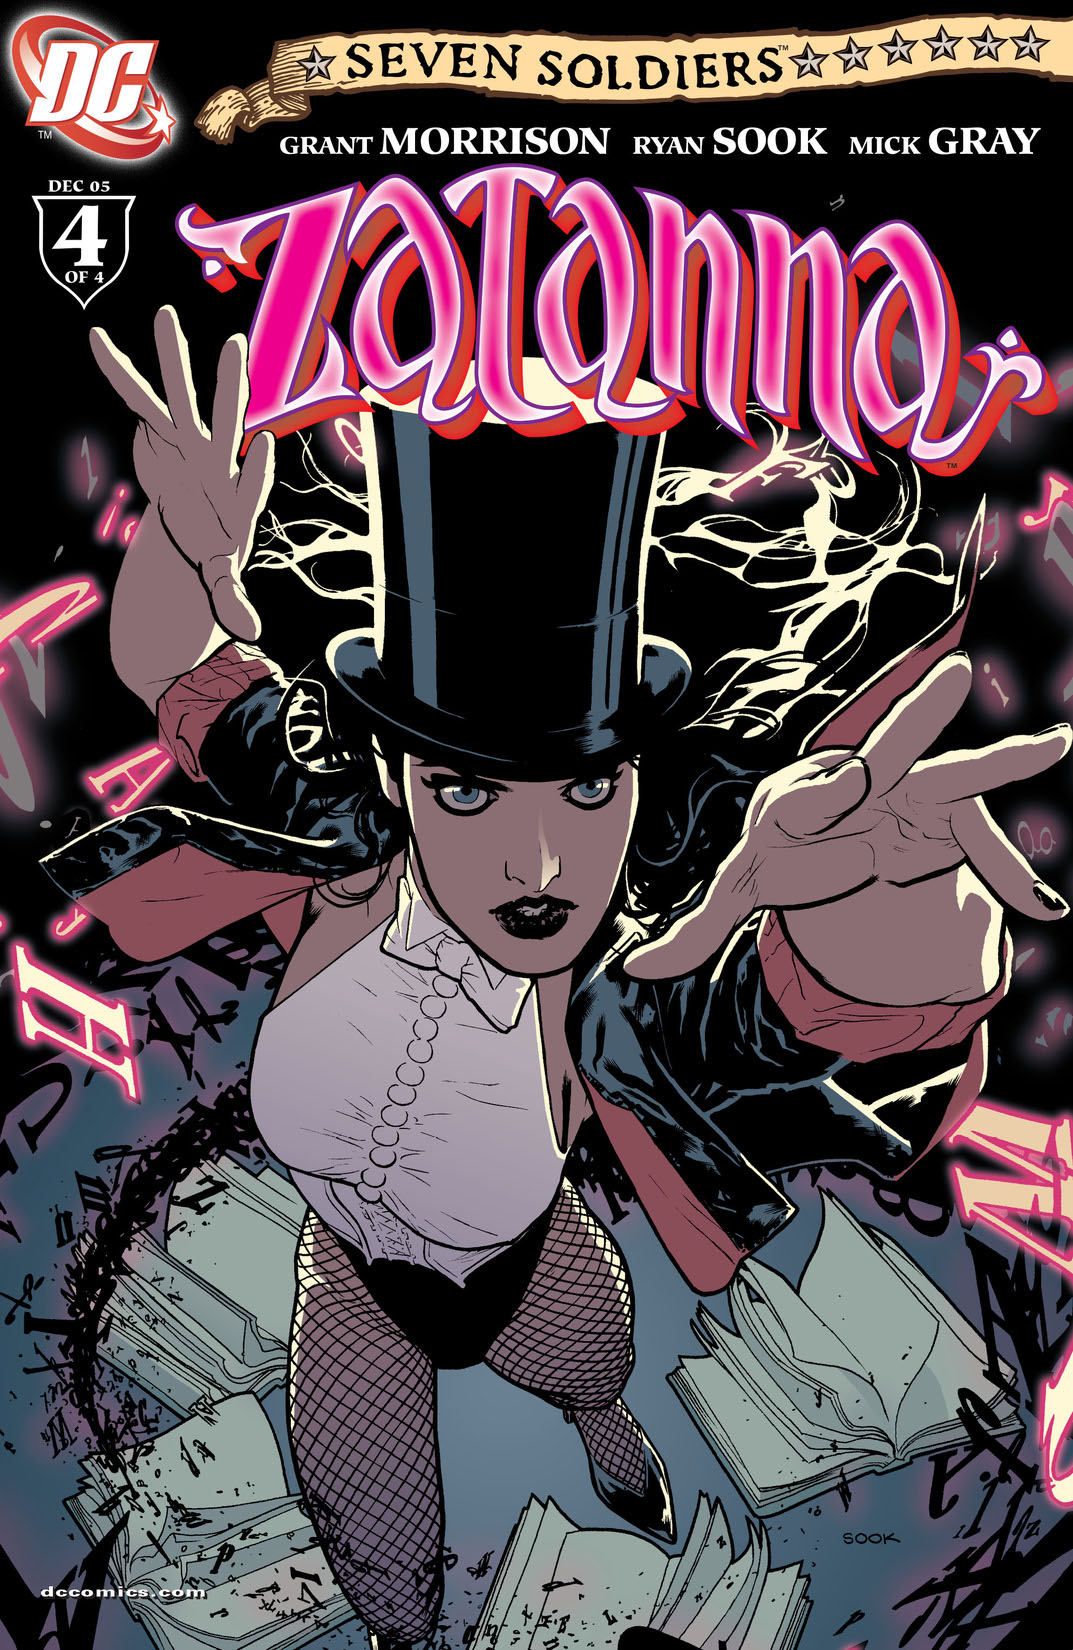 Seven Soldiers: Zatanna #4 preview images